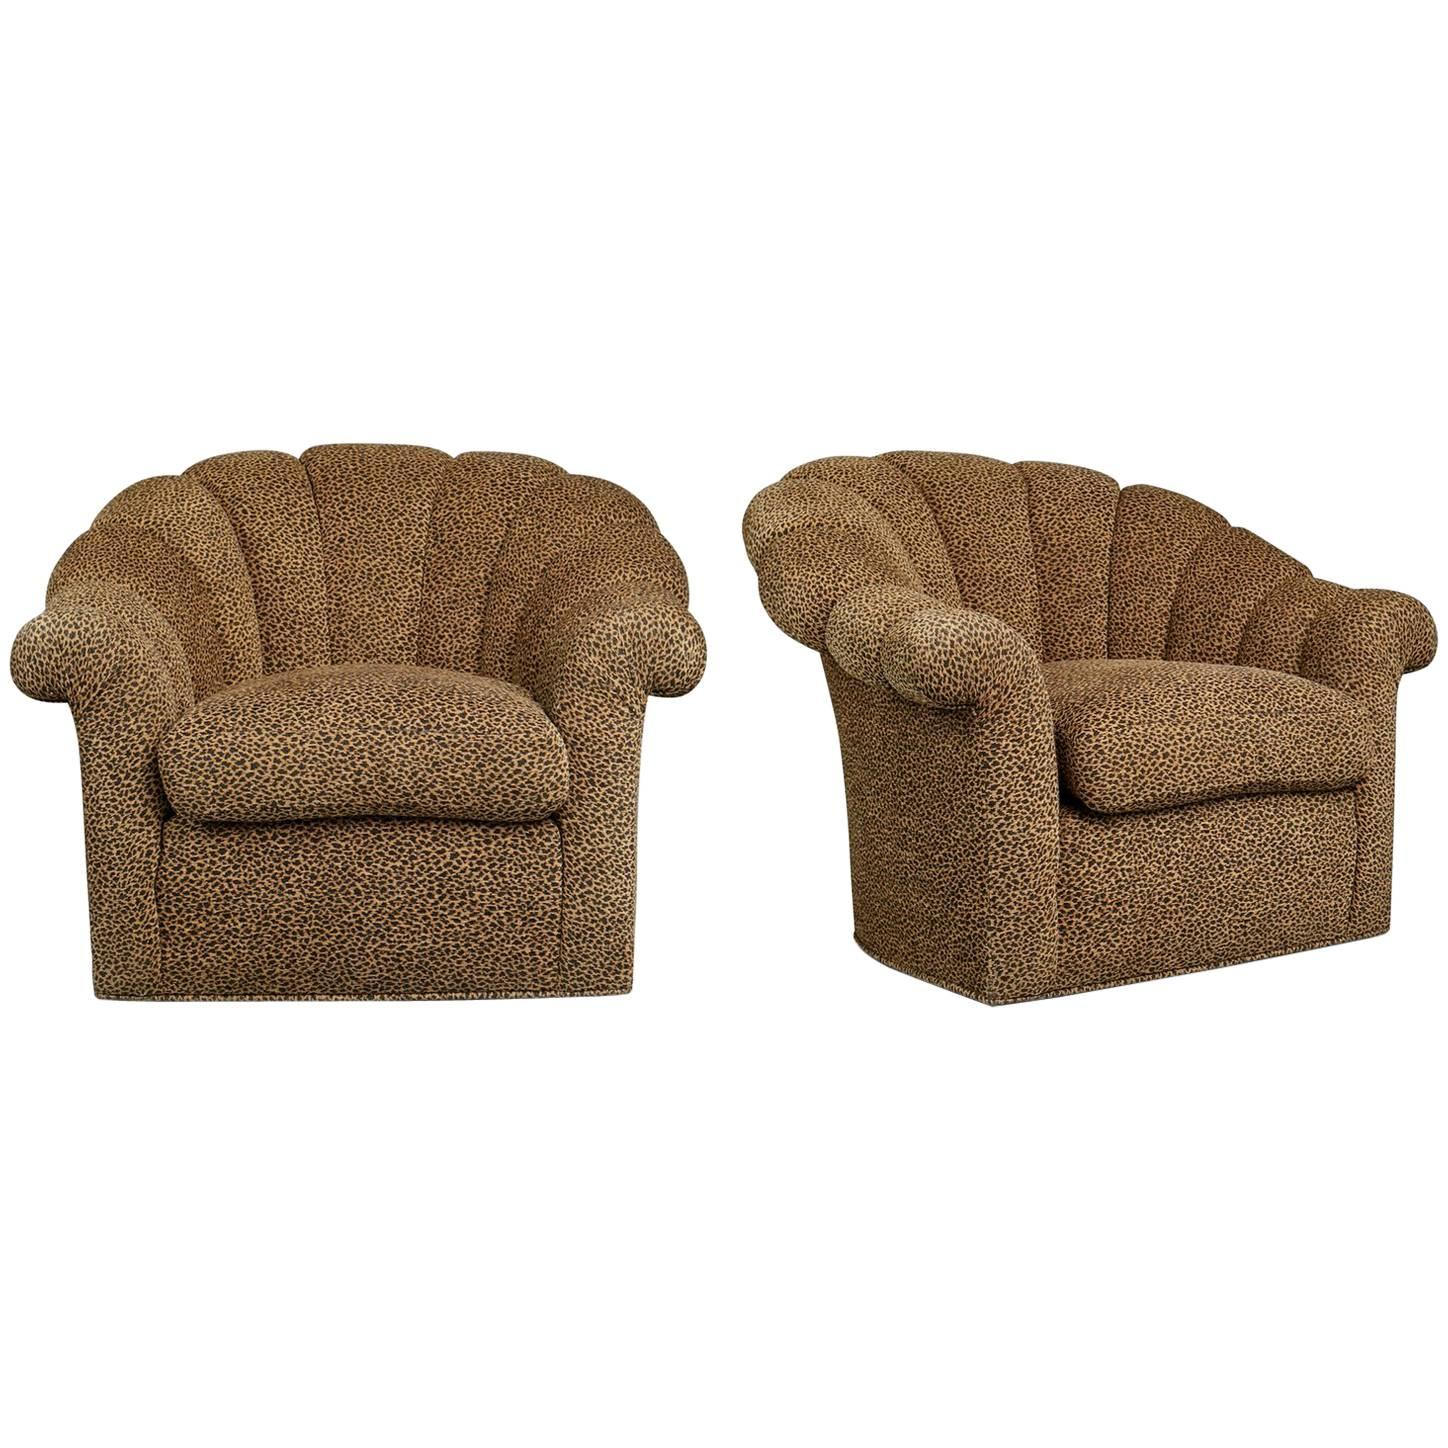 Art Deco Style Leopard Print Swivel Club Chairs with Channel Tufting, Pair